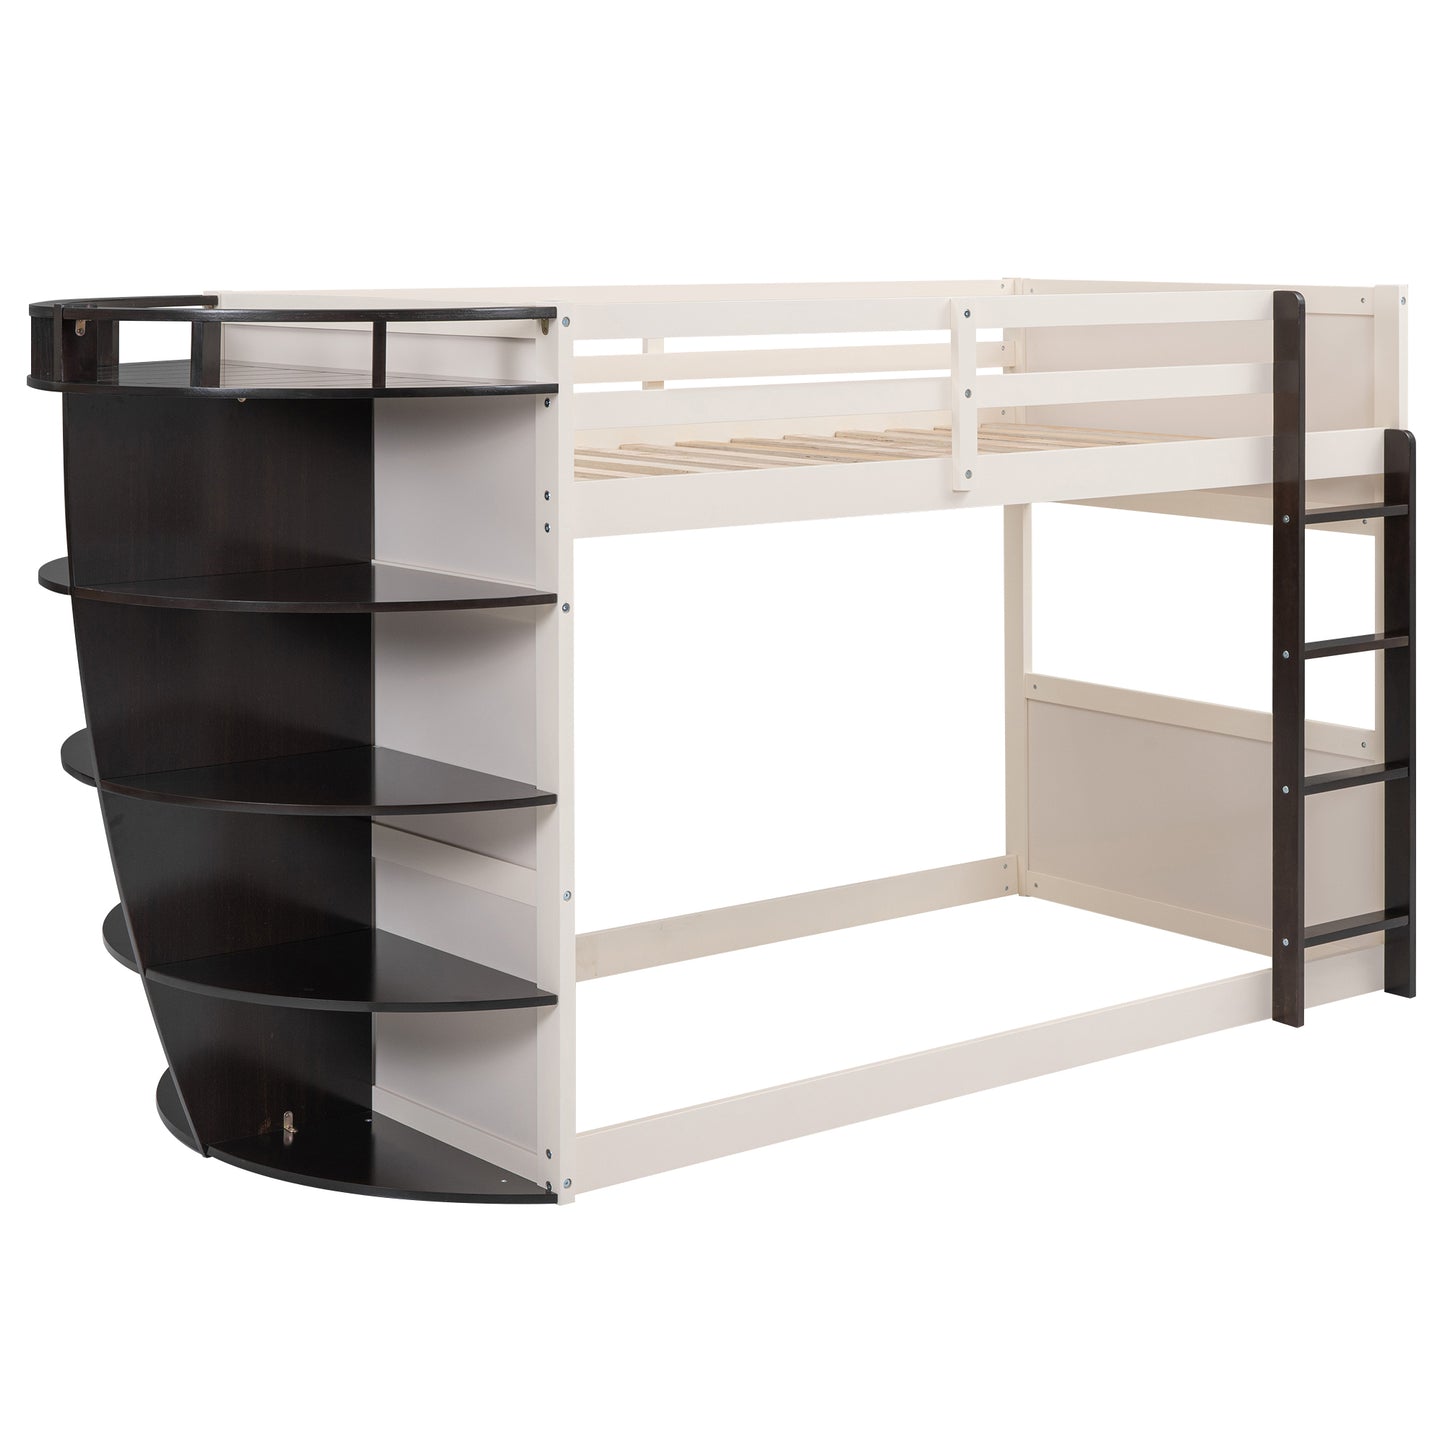 Twin over Twin Boat-Like Shape Bunk Bed with Storage Shelves, Cream+Espresso - Enova Luxe Home Store